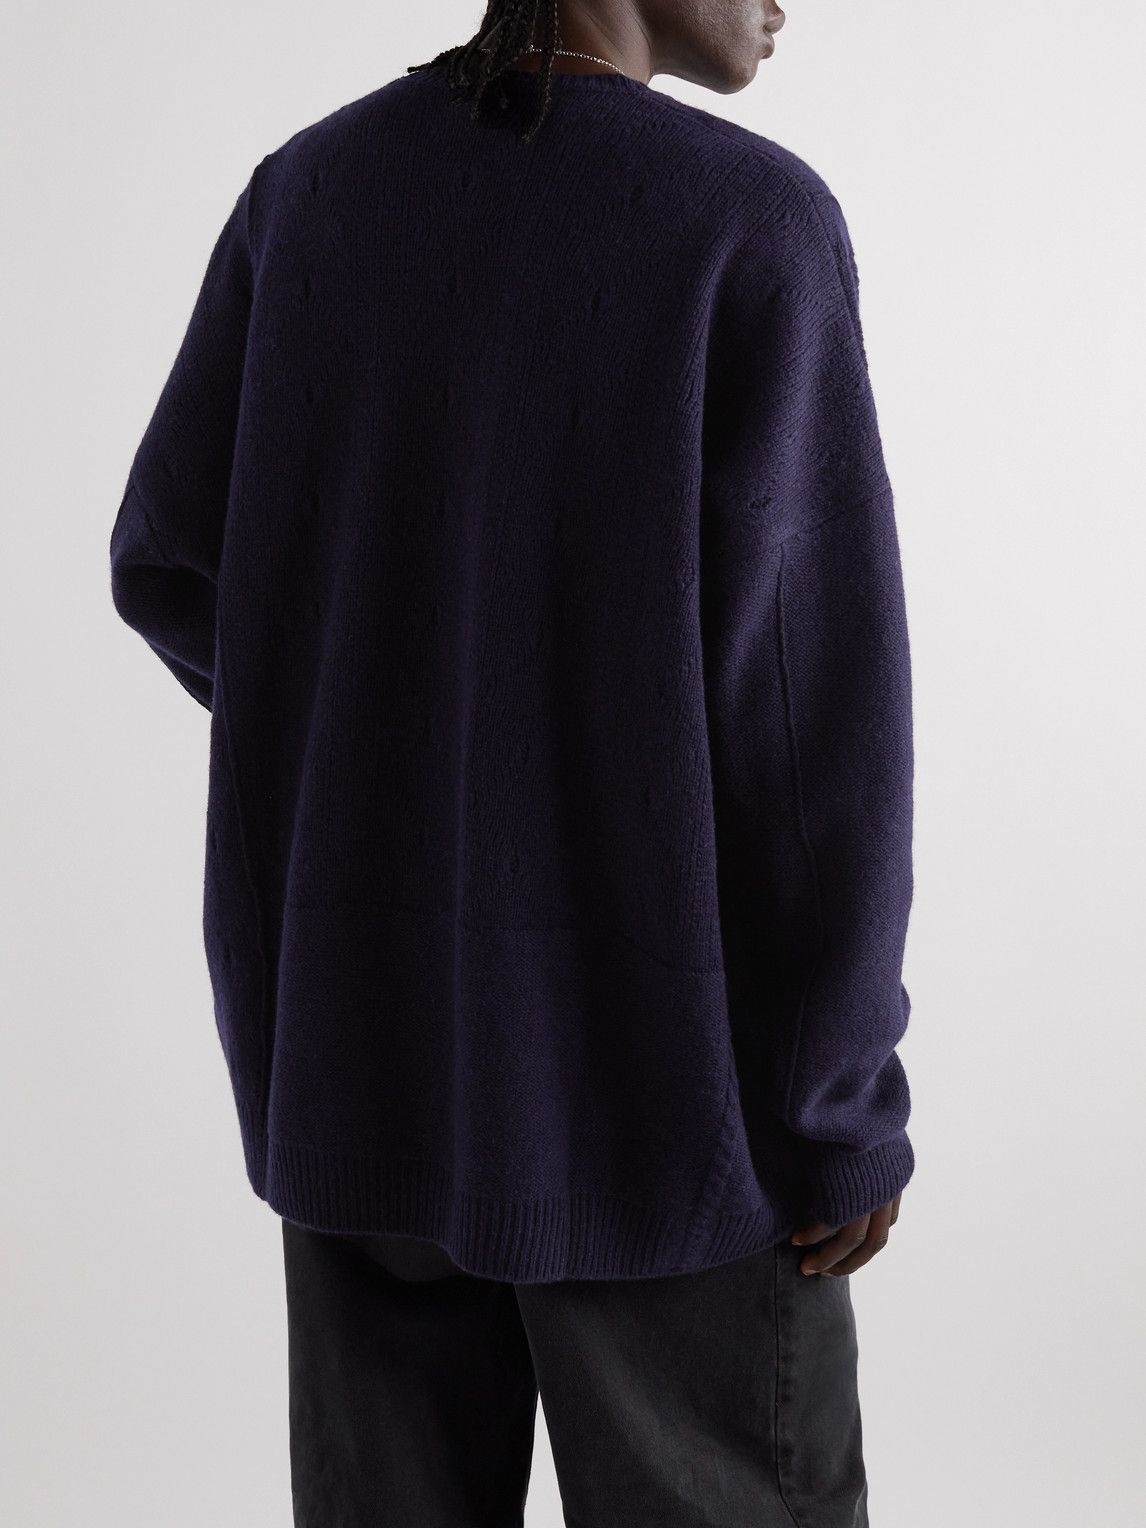 Raf Simons - Oversized Printed Cable-Knit Merino Wool Sweater - Blue ...